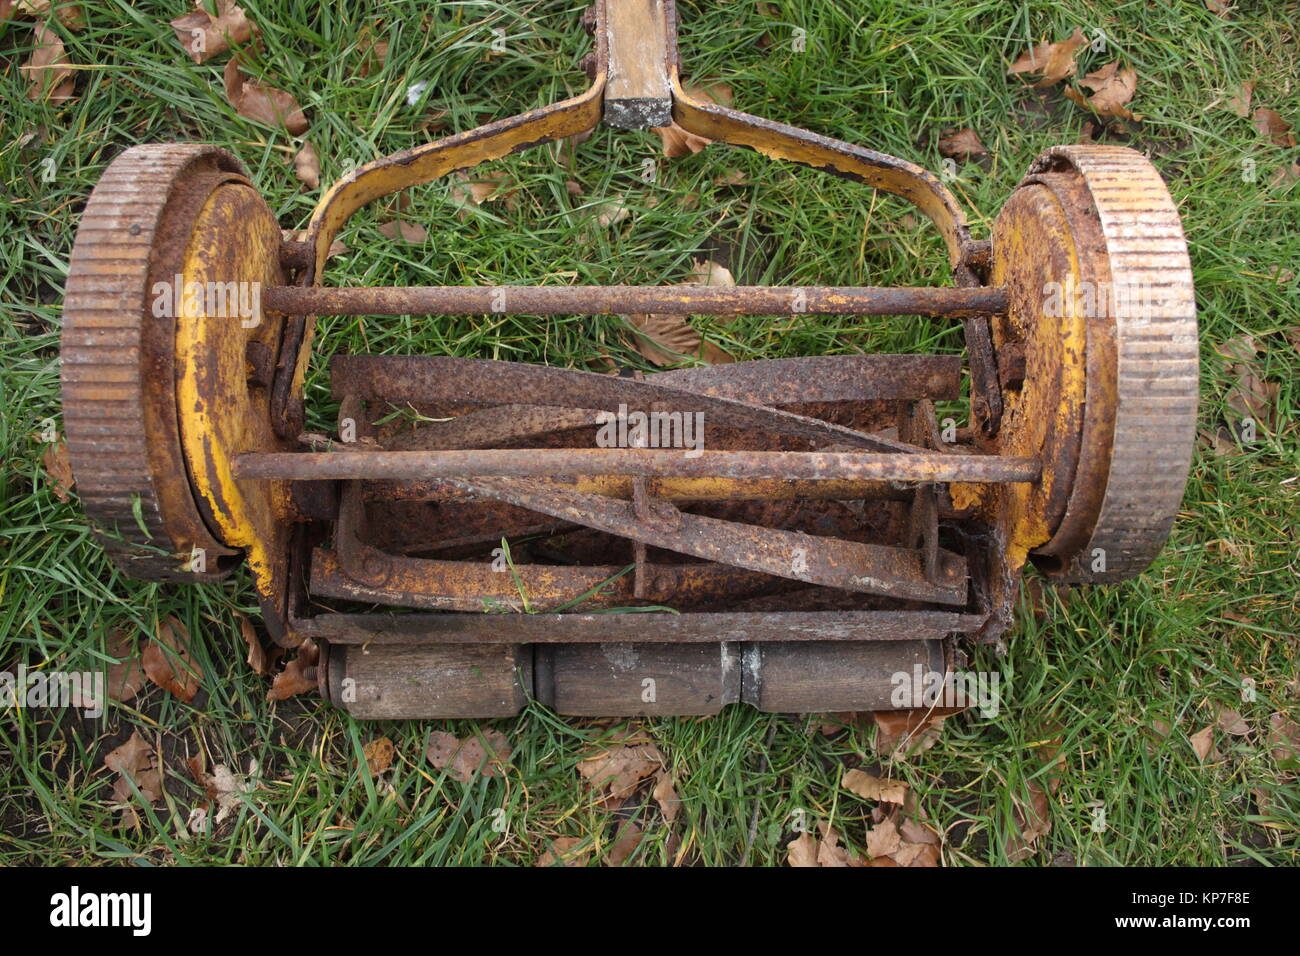 Old Hand push lawn mover, with spindle blade for cutting grass. Showing blade mechinism. Stock Photo